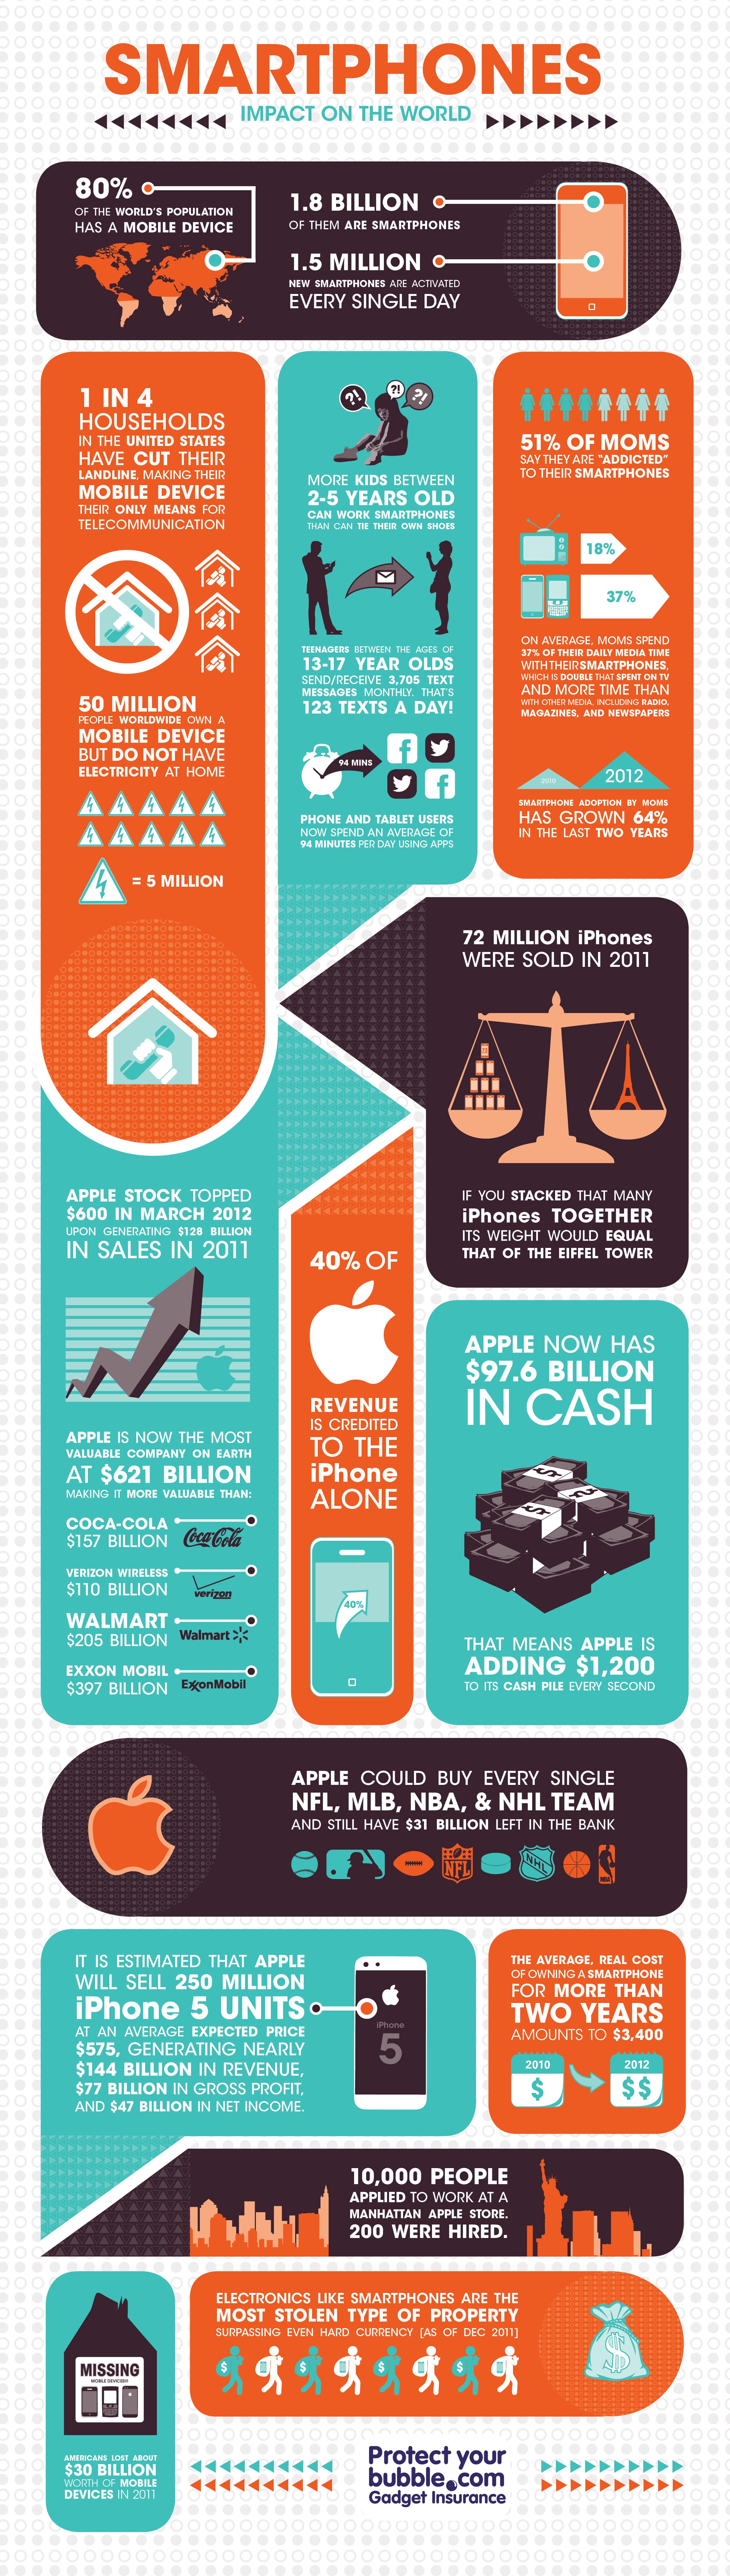 Apple’s Financial Gain From The iPhone [Infographic]